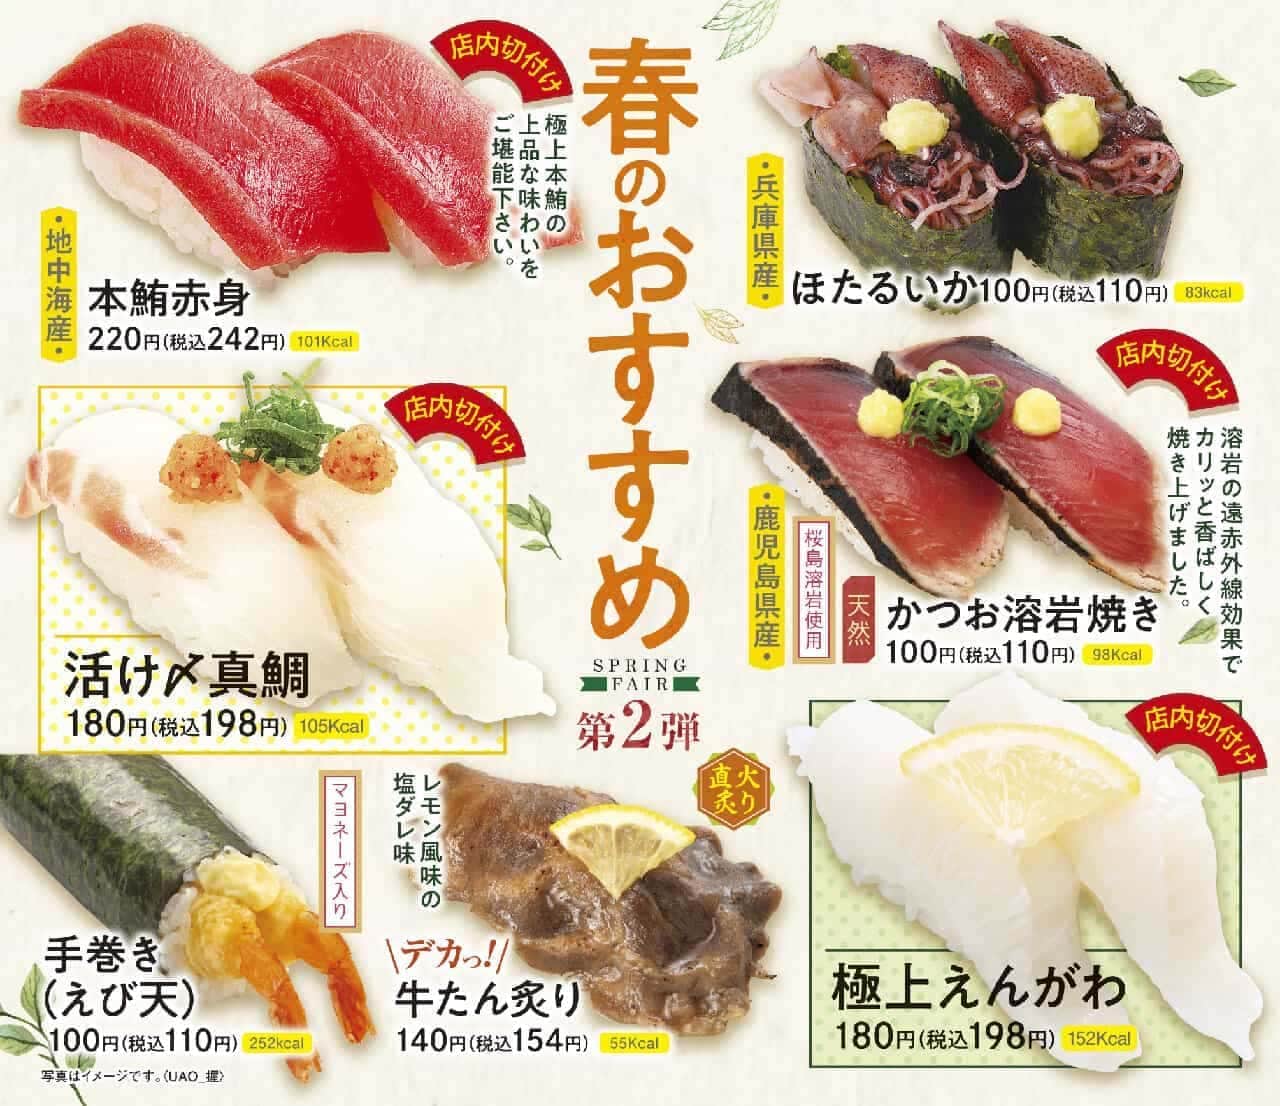 Genki Sushi Spring Recommended 2nd Product